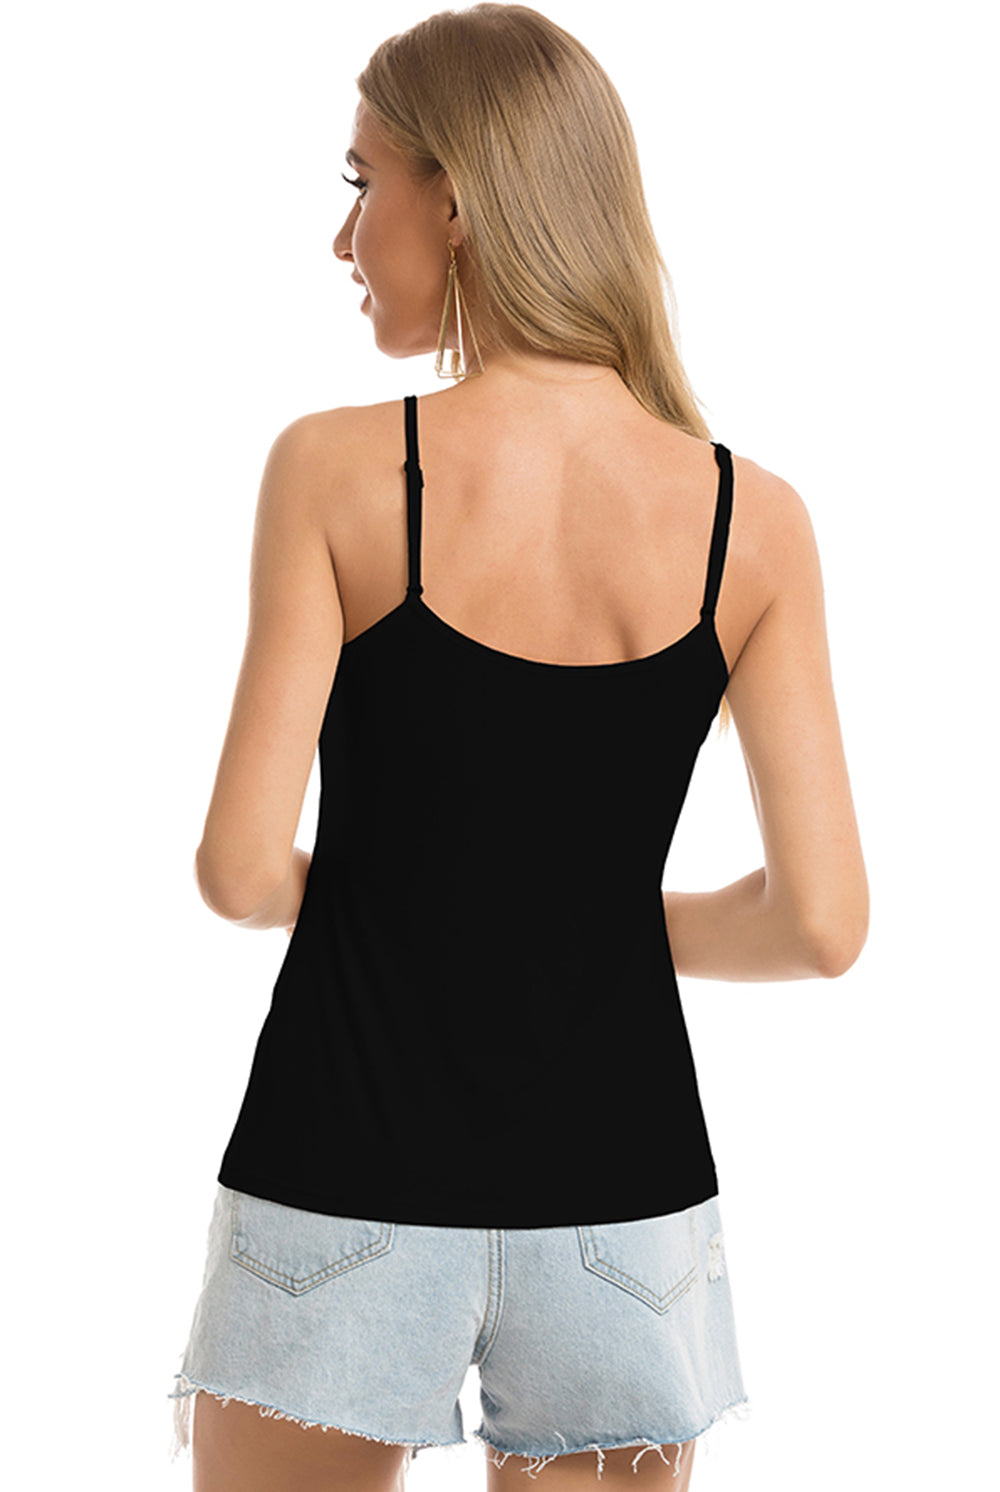 Elegant white spaghetti strap camisole top on a model, an essential wardrobe staple for pairing or standalone wear.